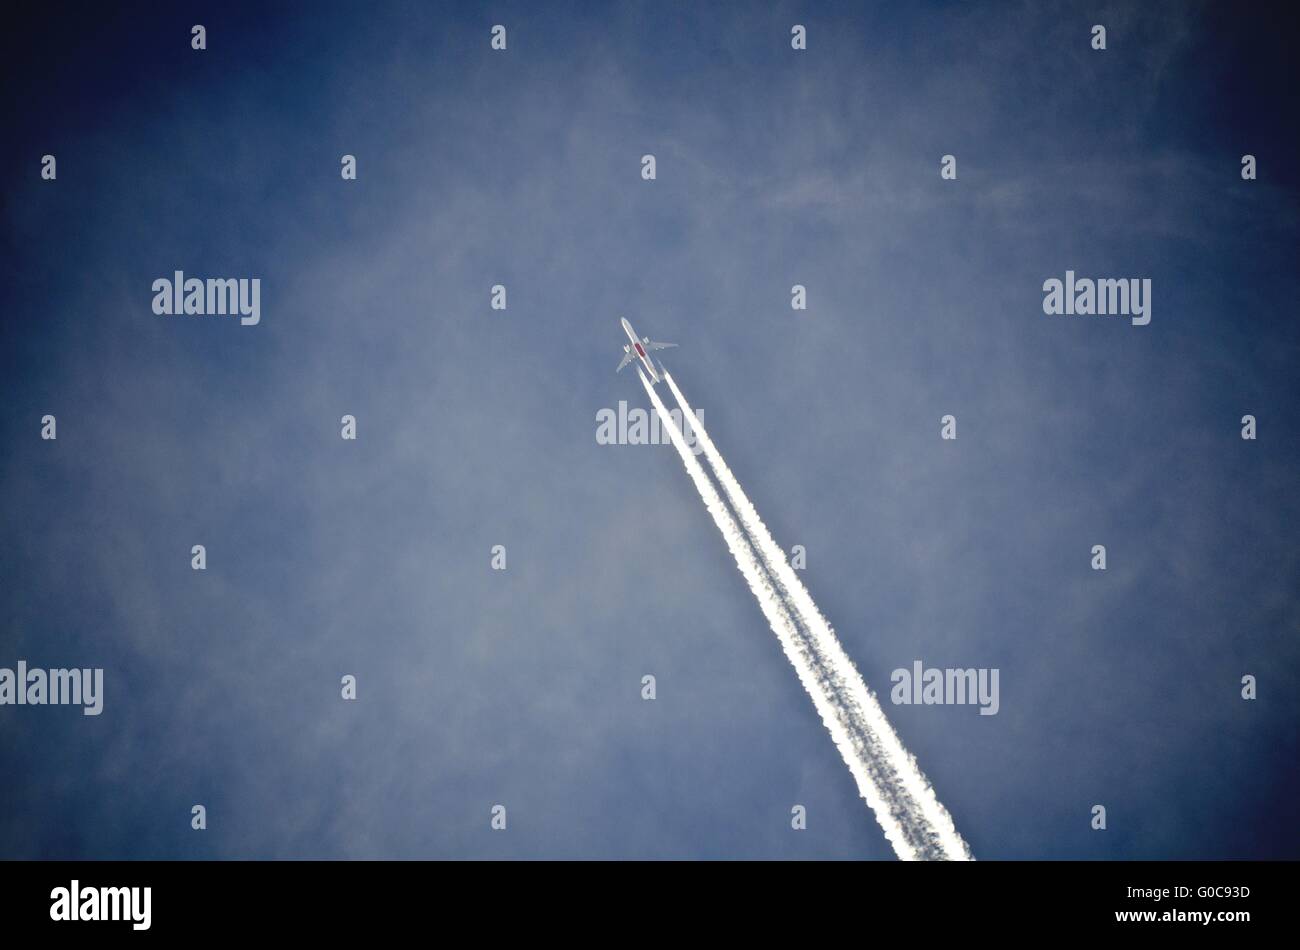 airliner with condensation trail at a blue sky Stock Photo